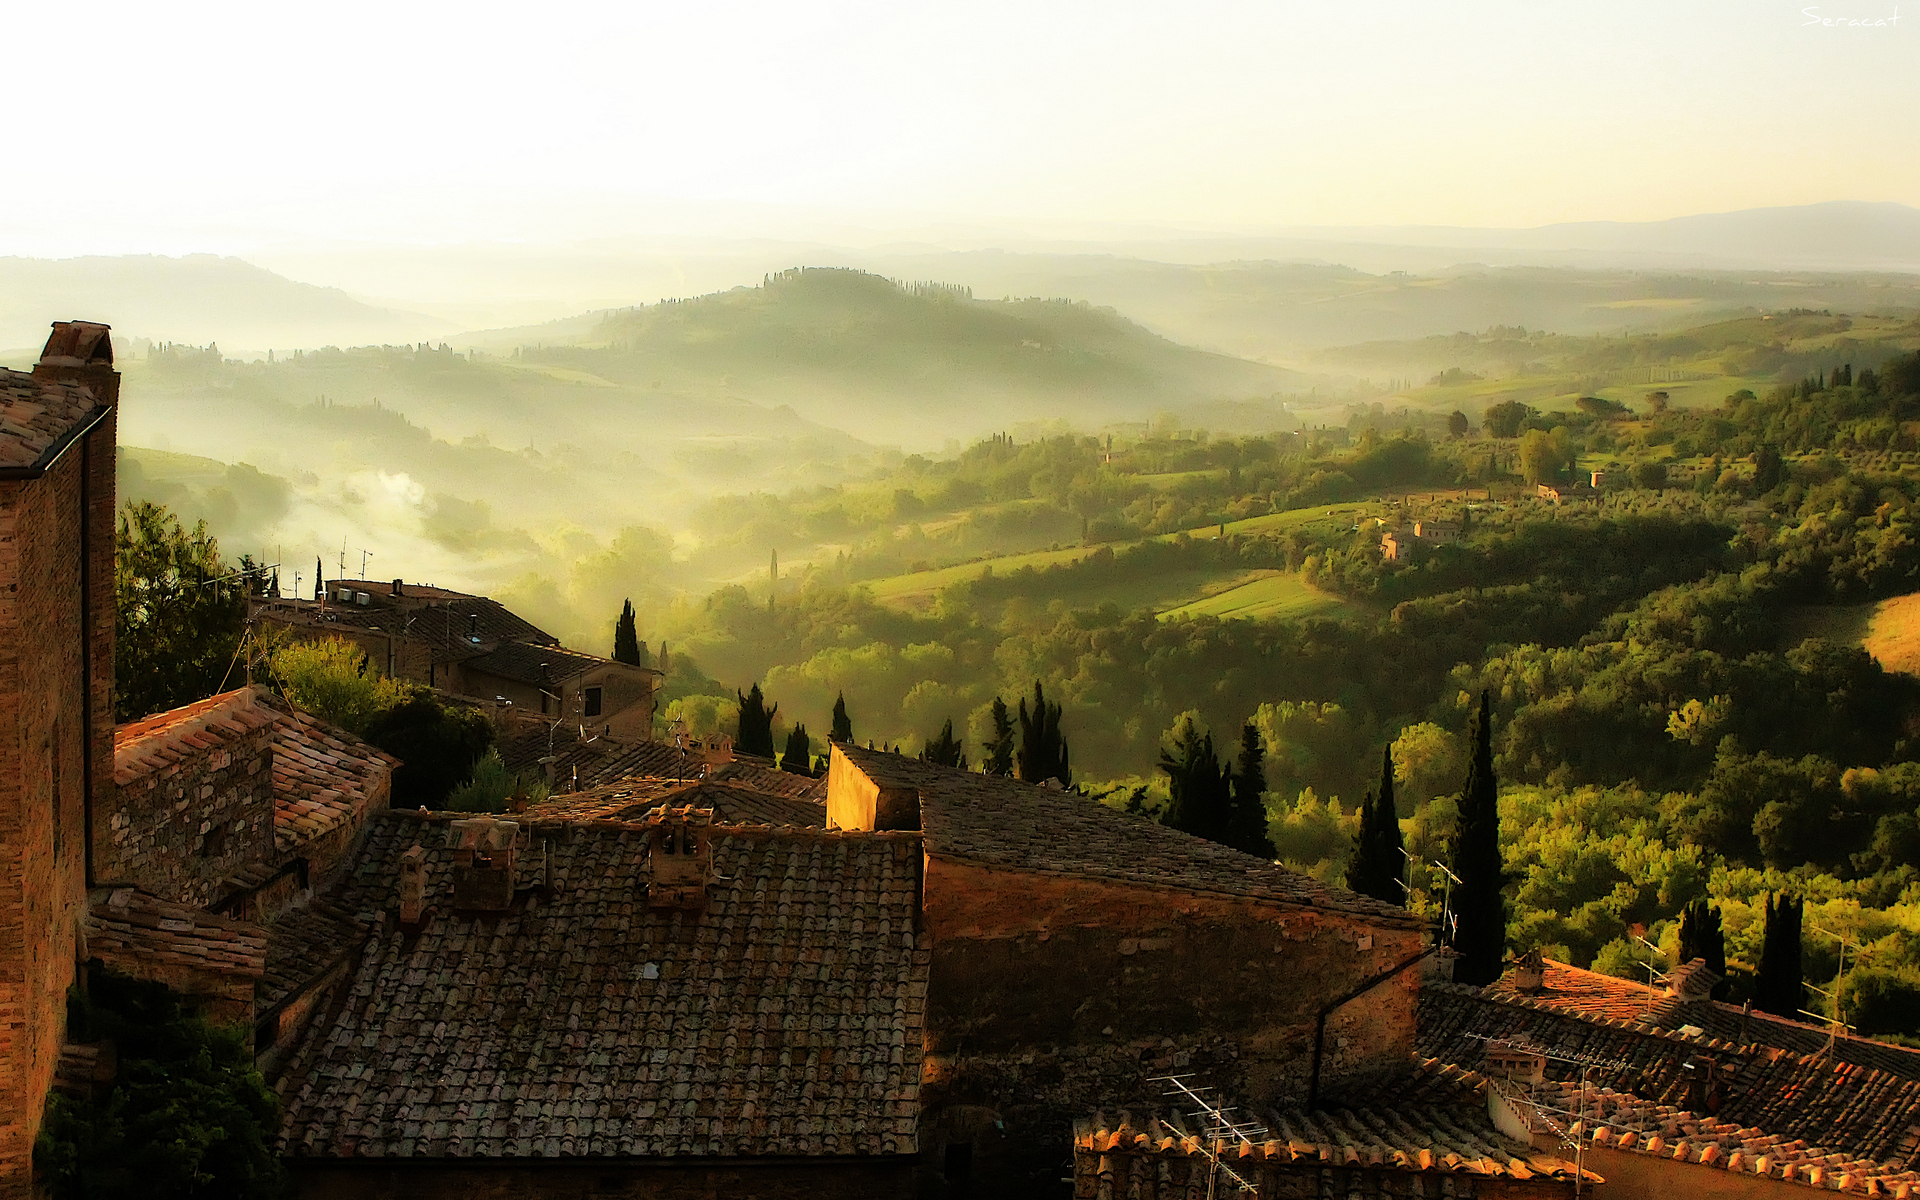 photography, tuscany, earth, green, landscape, roof